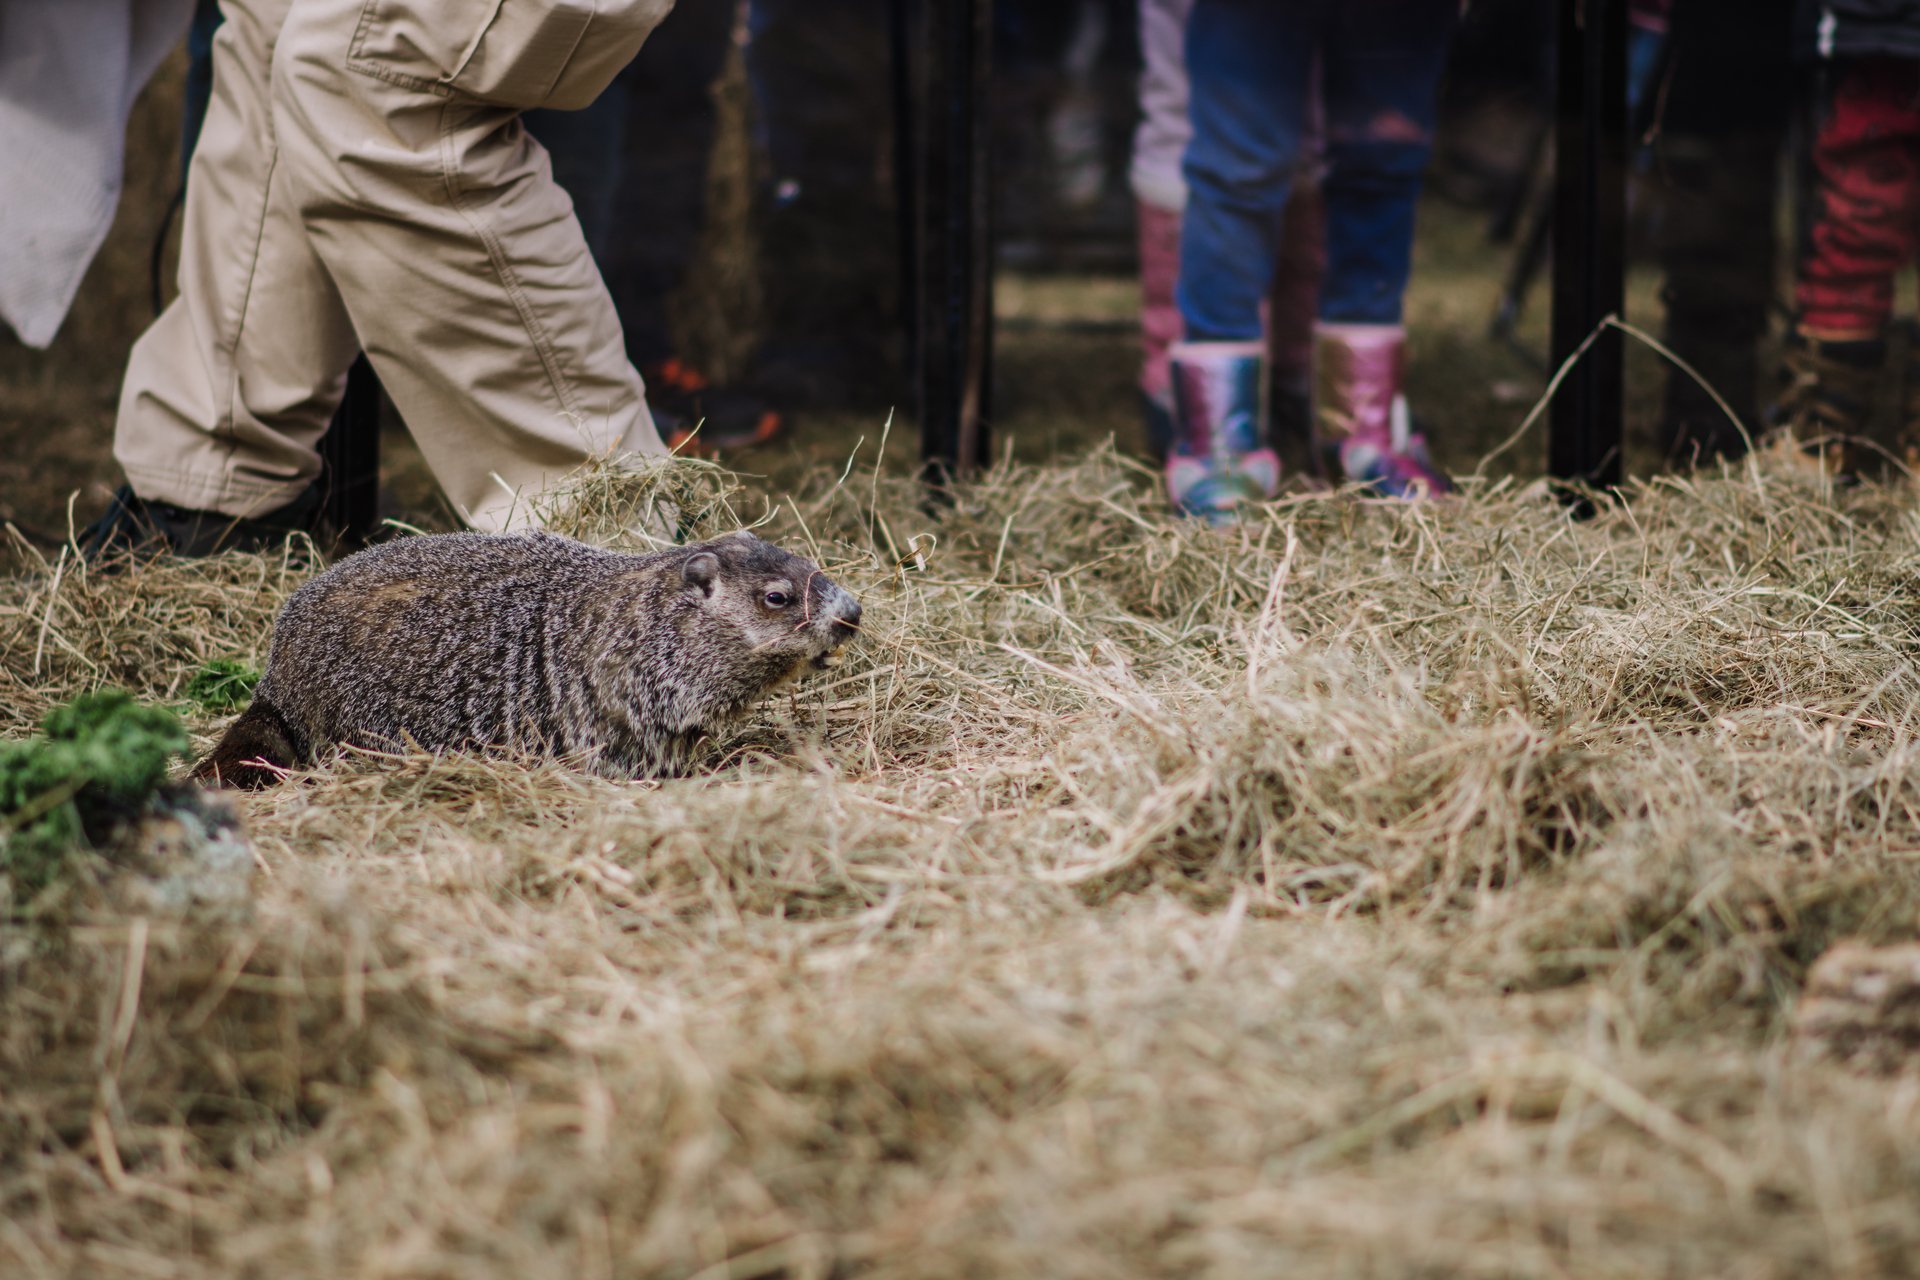 A groundhog in a pile of straw with boots of people watching in the background.